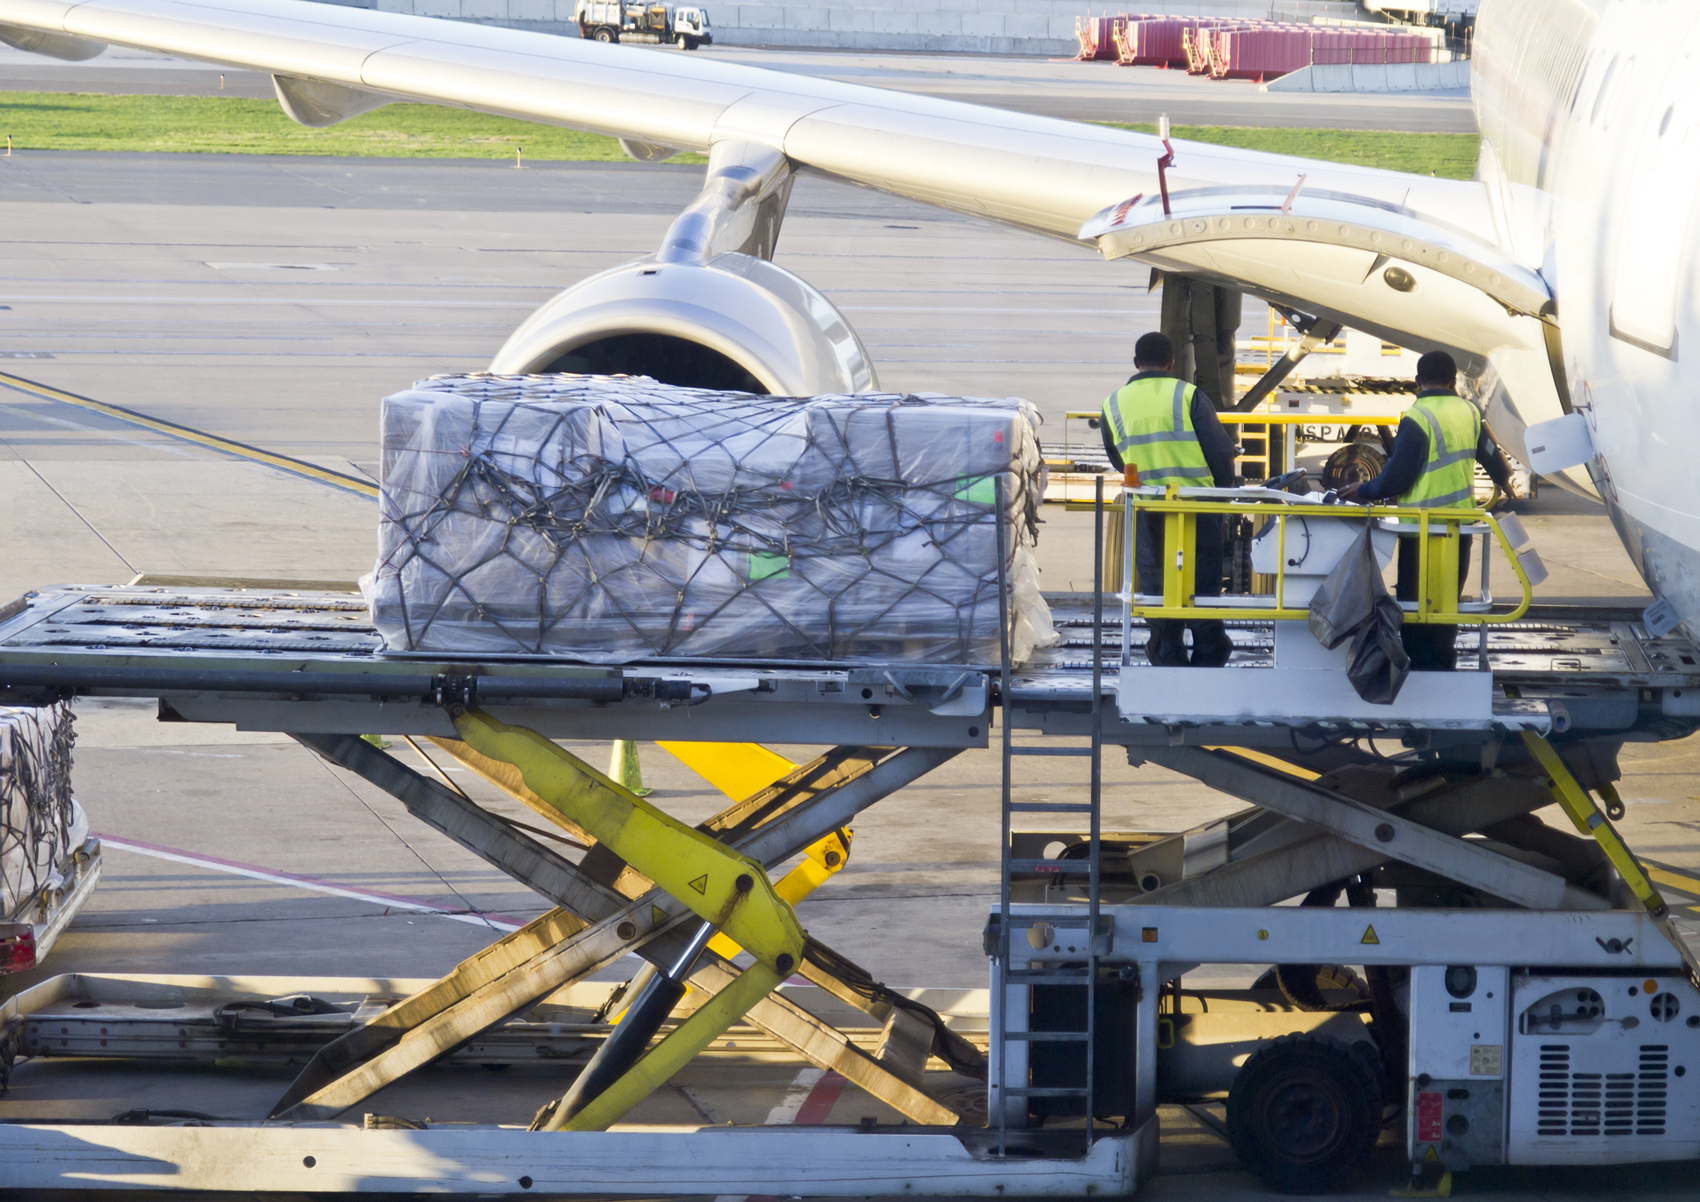 Loading Cargo into an Airbus 330